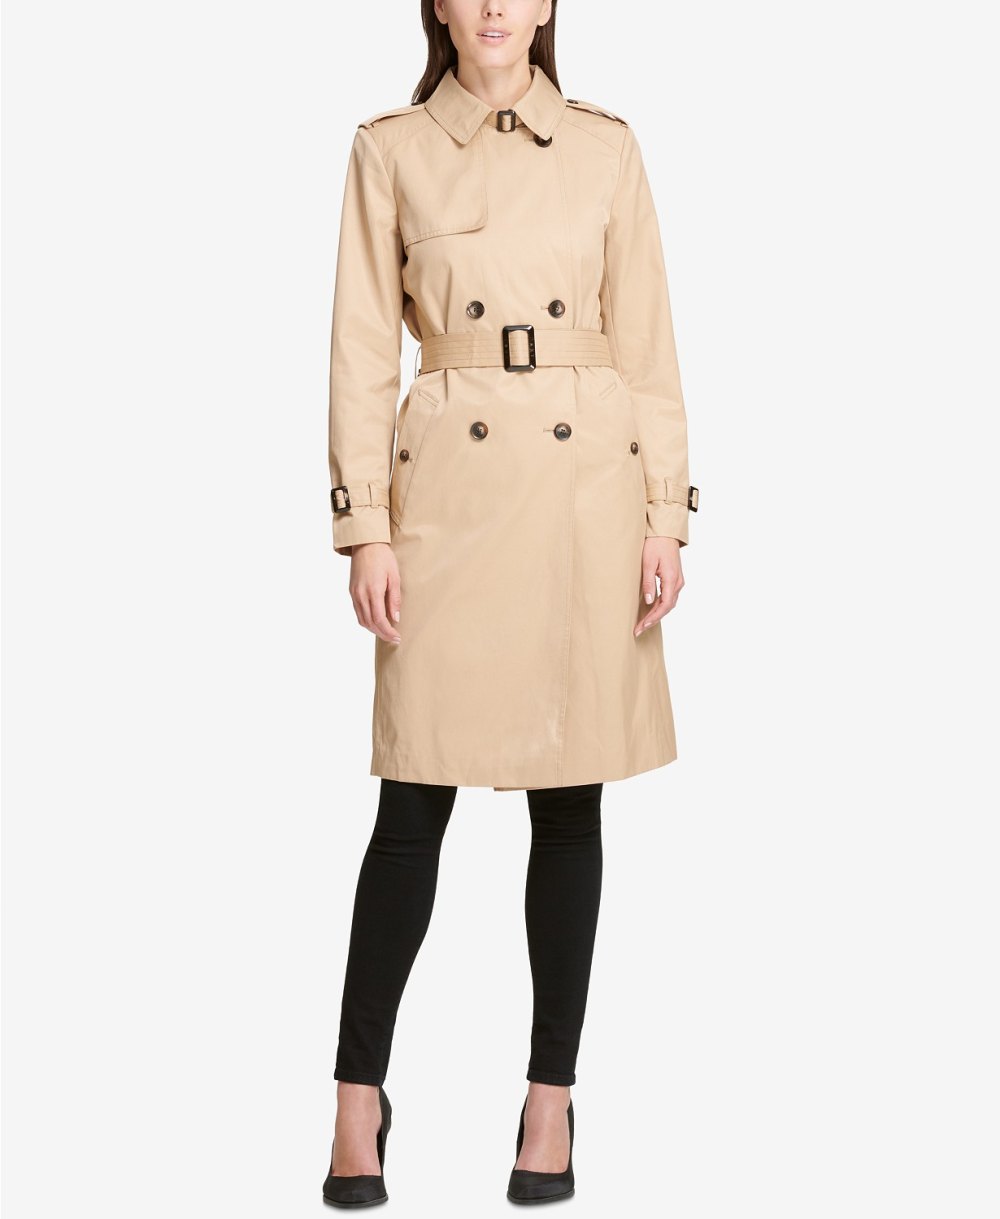 Daily Deals: Shop DKNY Trench Coat, DVF Bag, More | Us Weekly